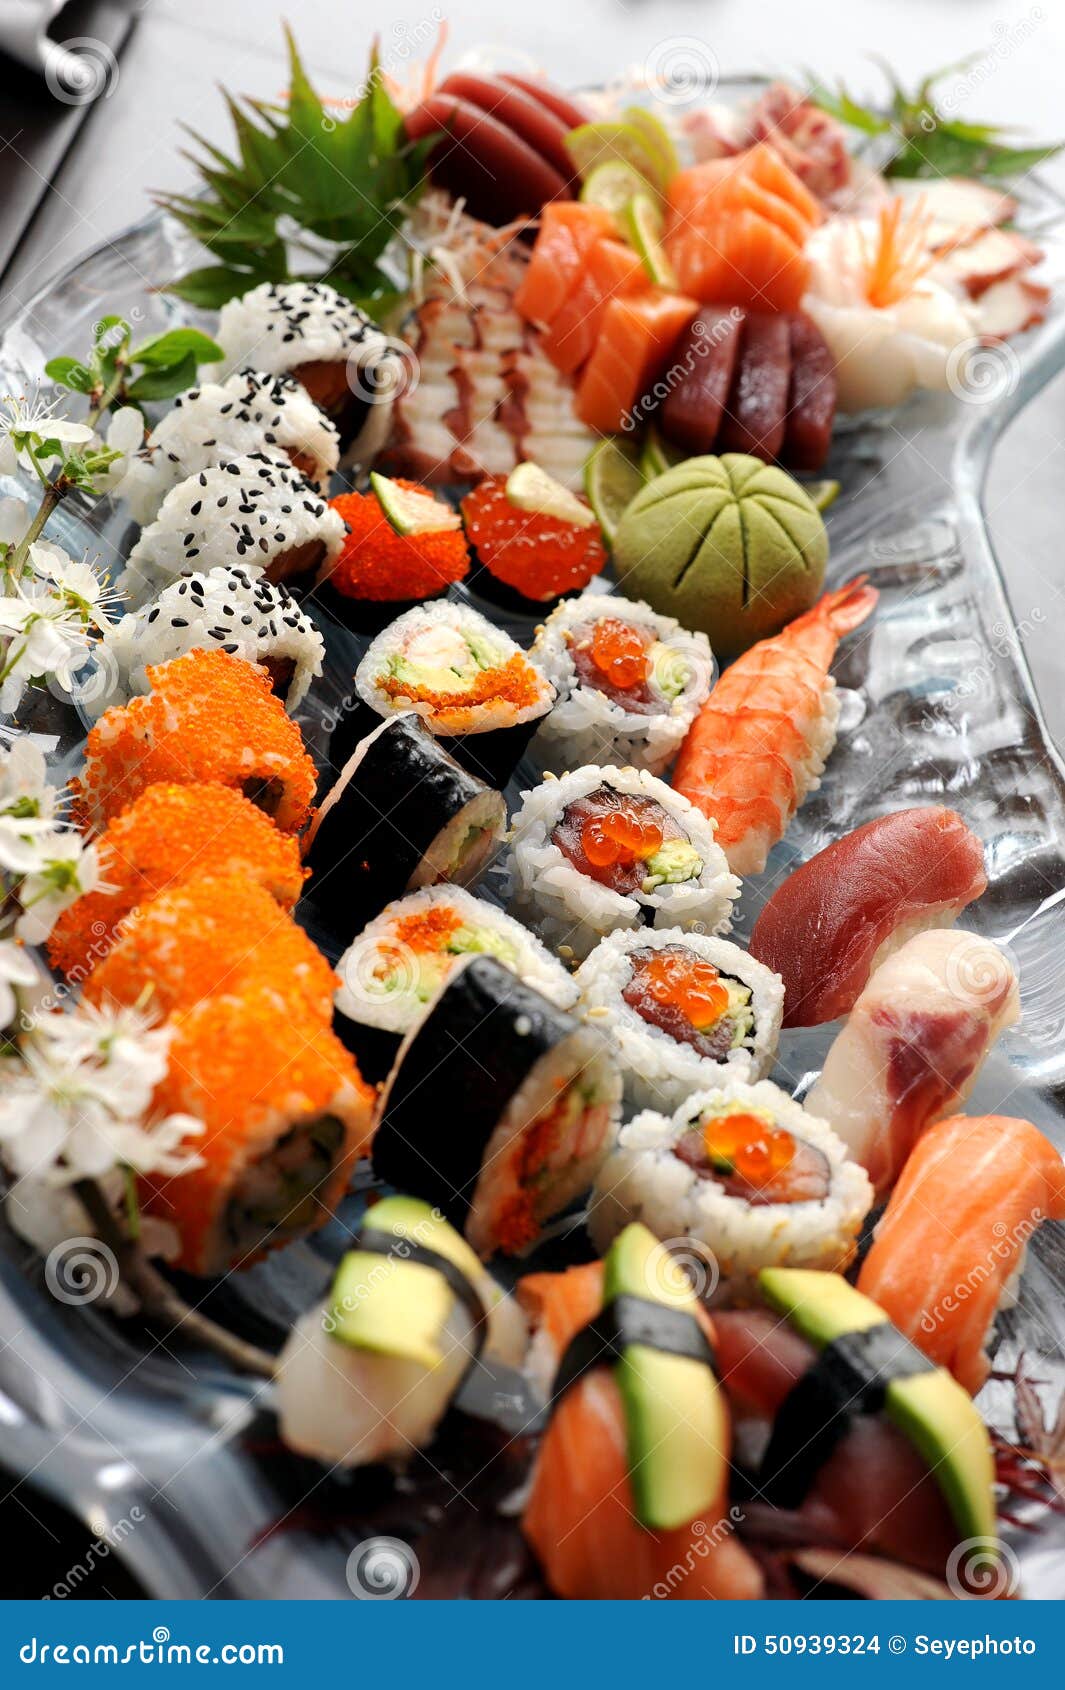 Mixed sushi plate stock photo. Image of meal, healthy - 50939324